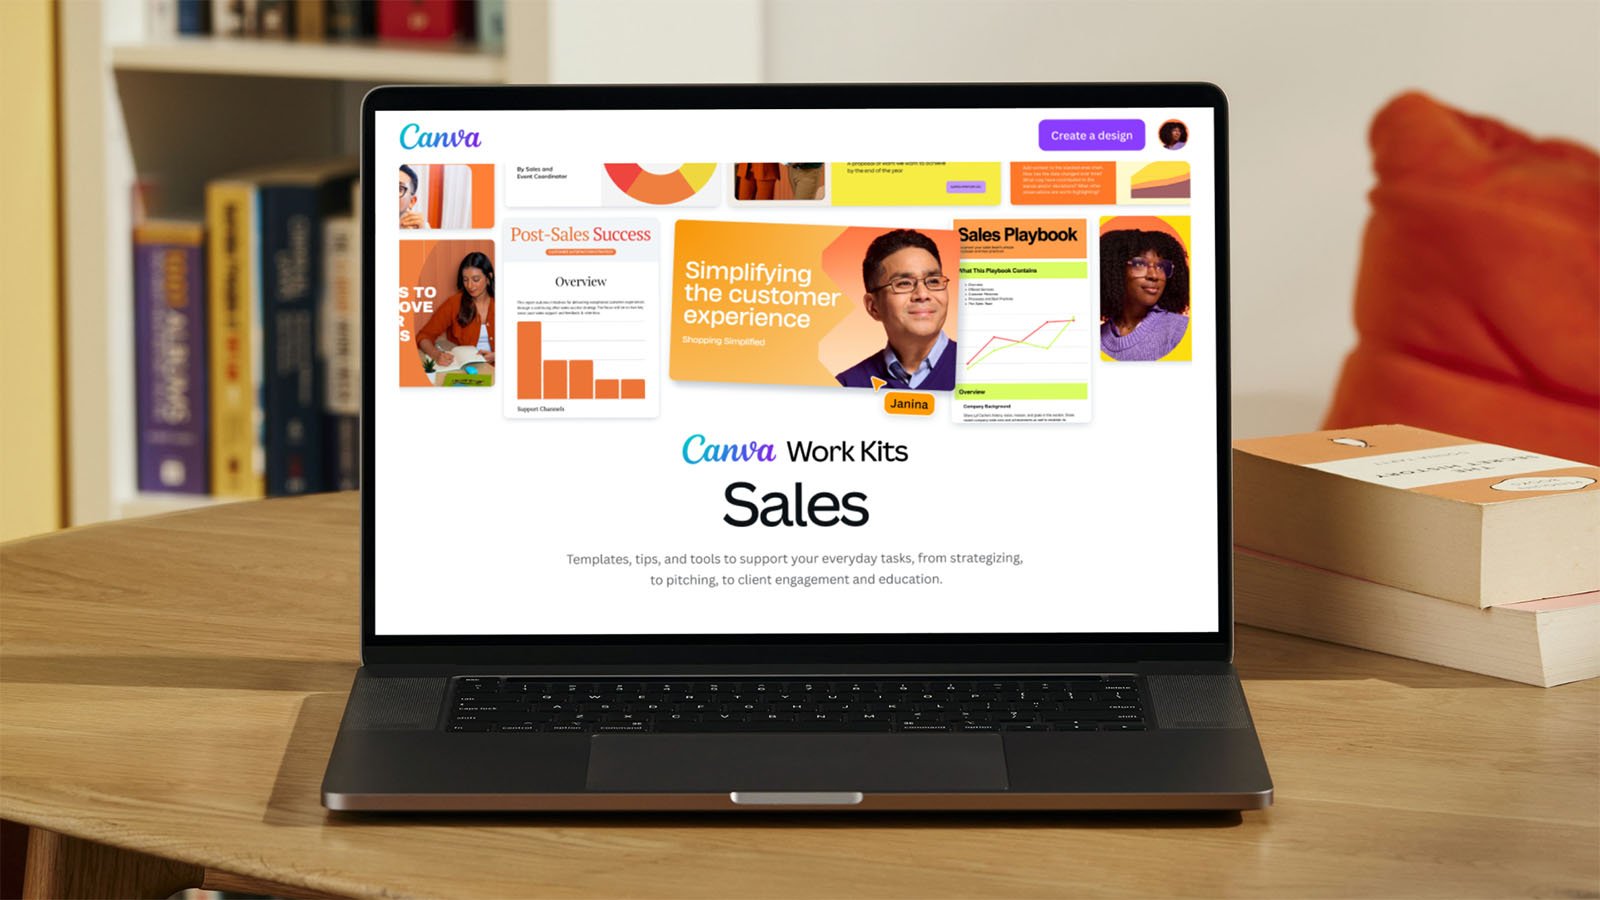 A laptop displaying the Canva website on its screen. The webpage shows various templates and tools for sales, including charts and infographics. The main heading reads "Canva Work Kits: Sales." The laptop is on a wooden desk with books and a bookshelf in the background.